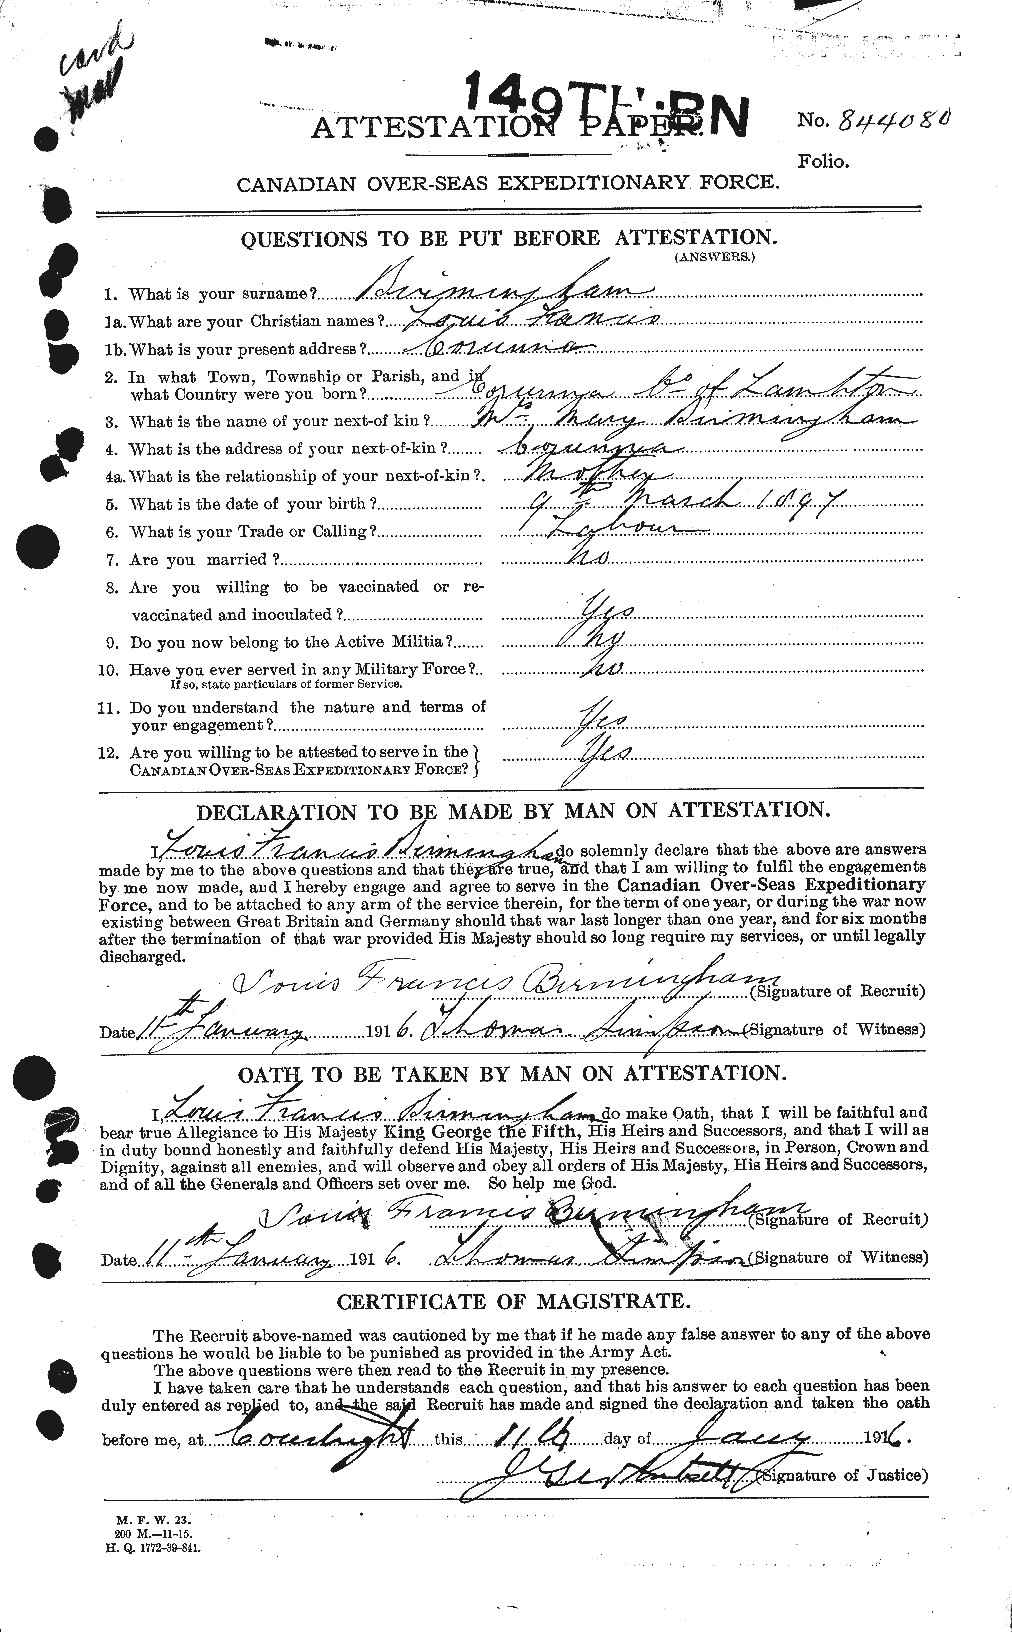 Personnel Records of the First World War - CEF 243941a